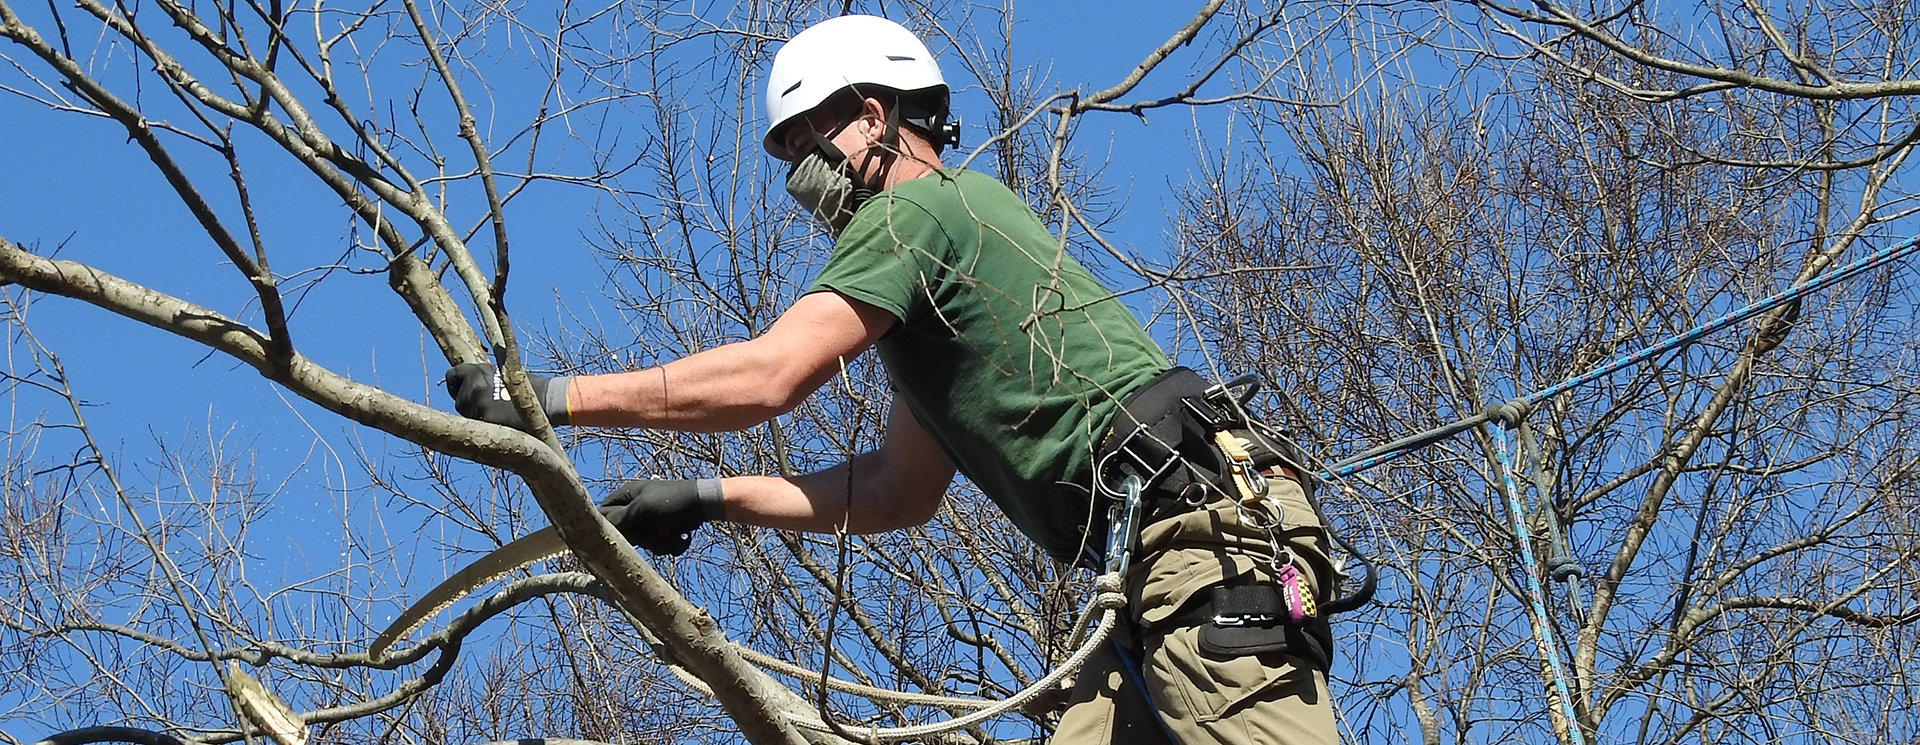 staff climbing on a tree trimming branches